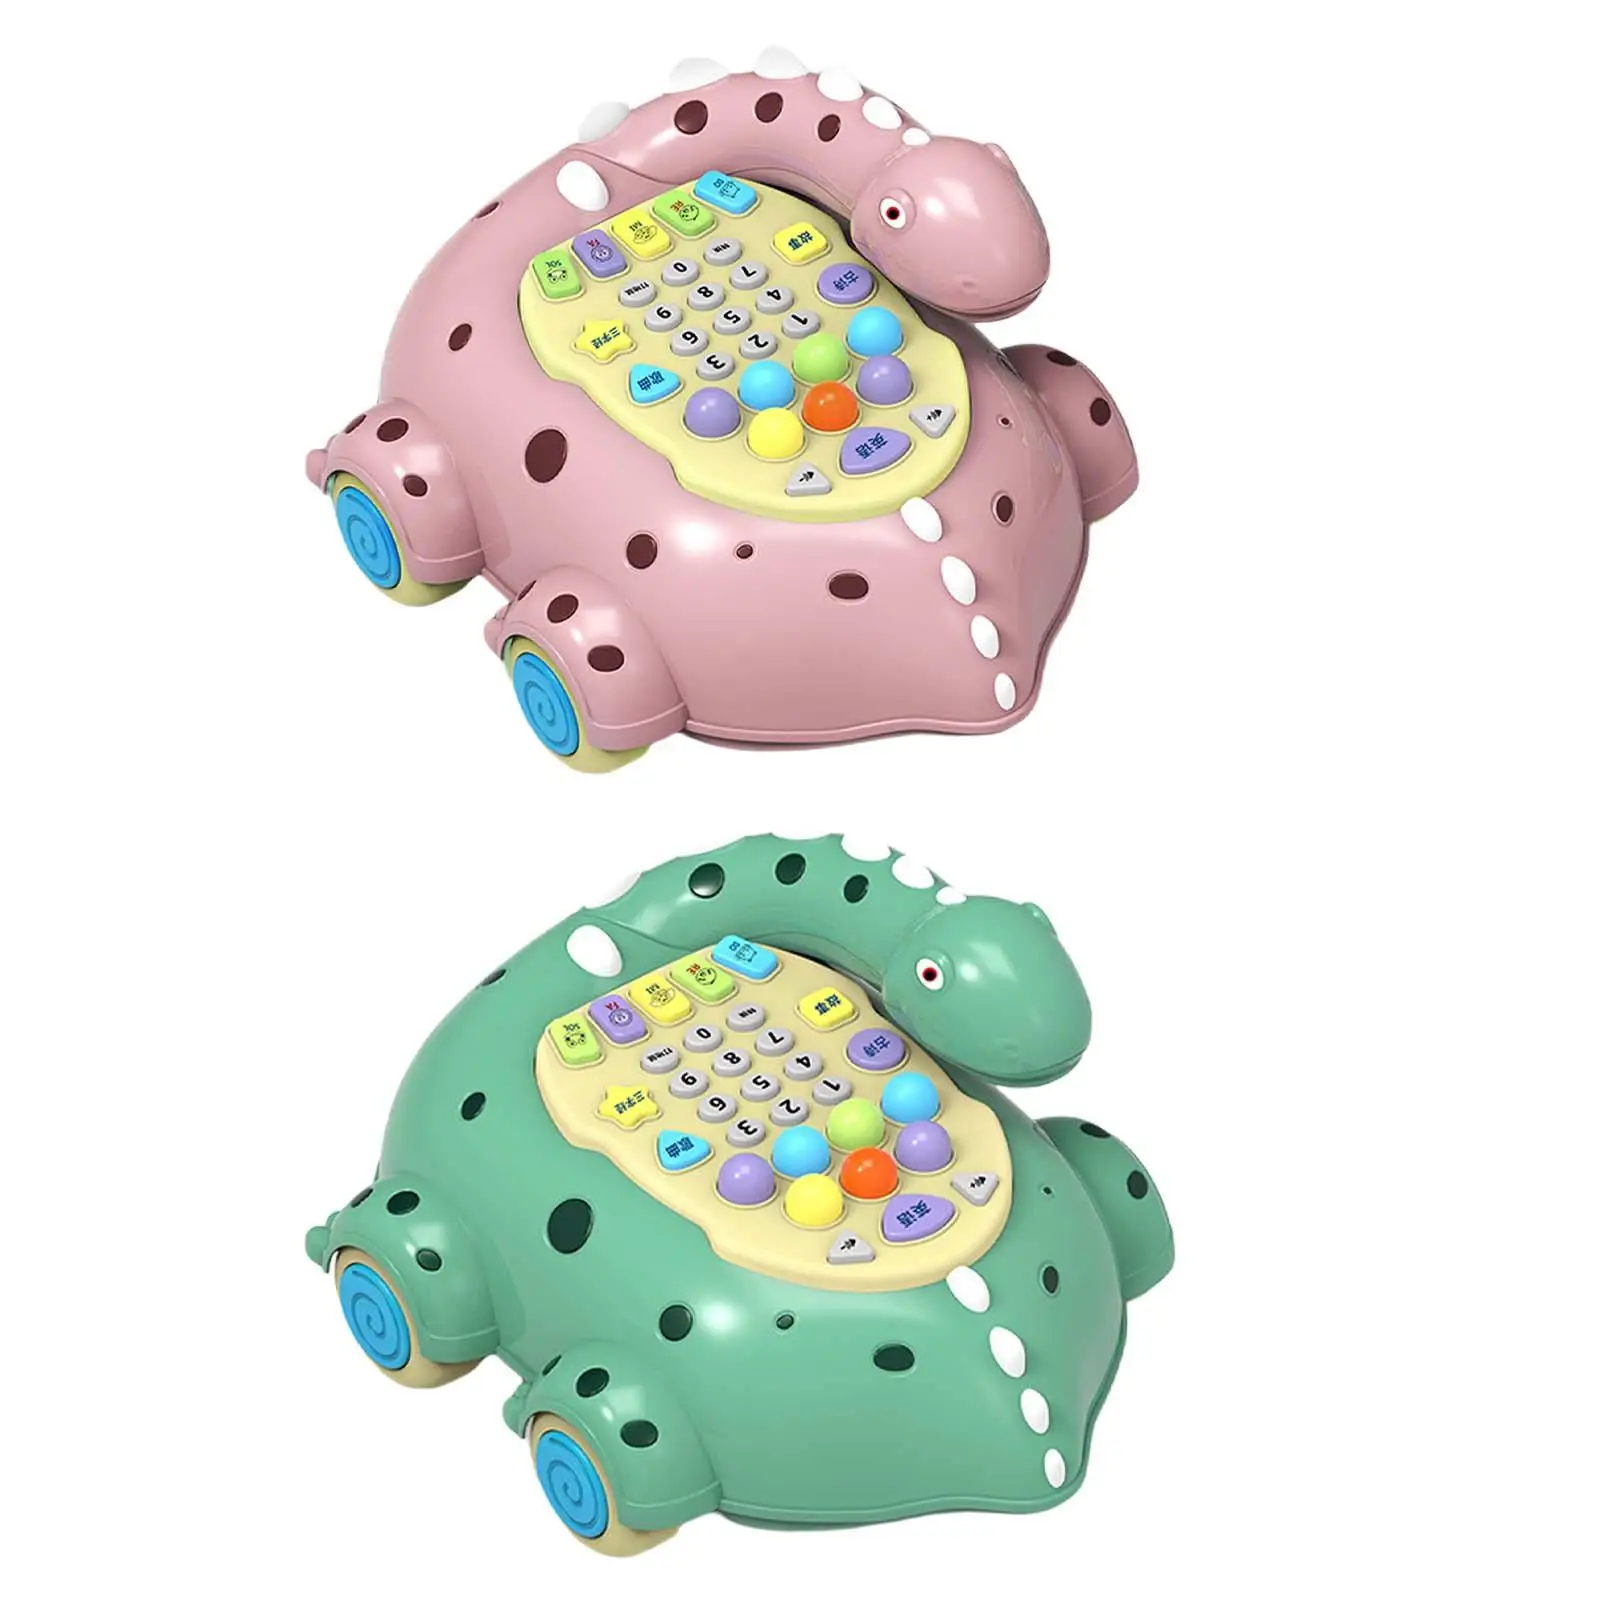 Music Light Phone Toy Children Phone Toy for Game Development Education